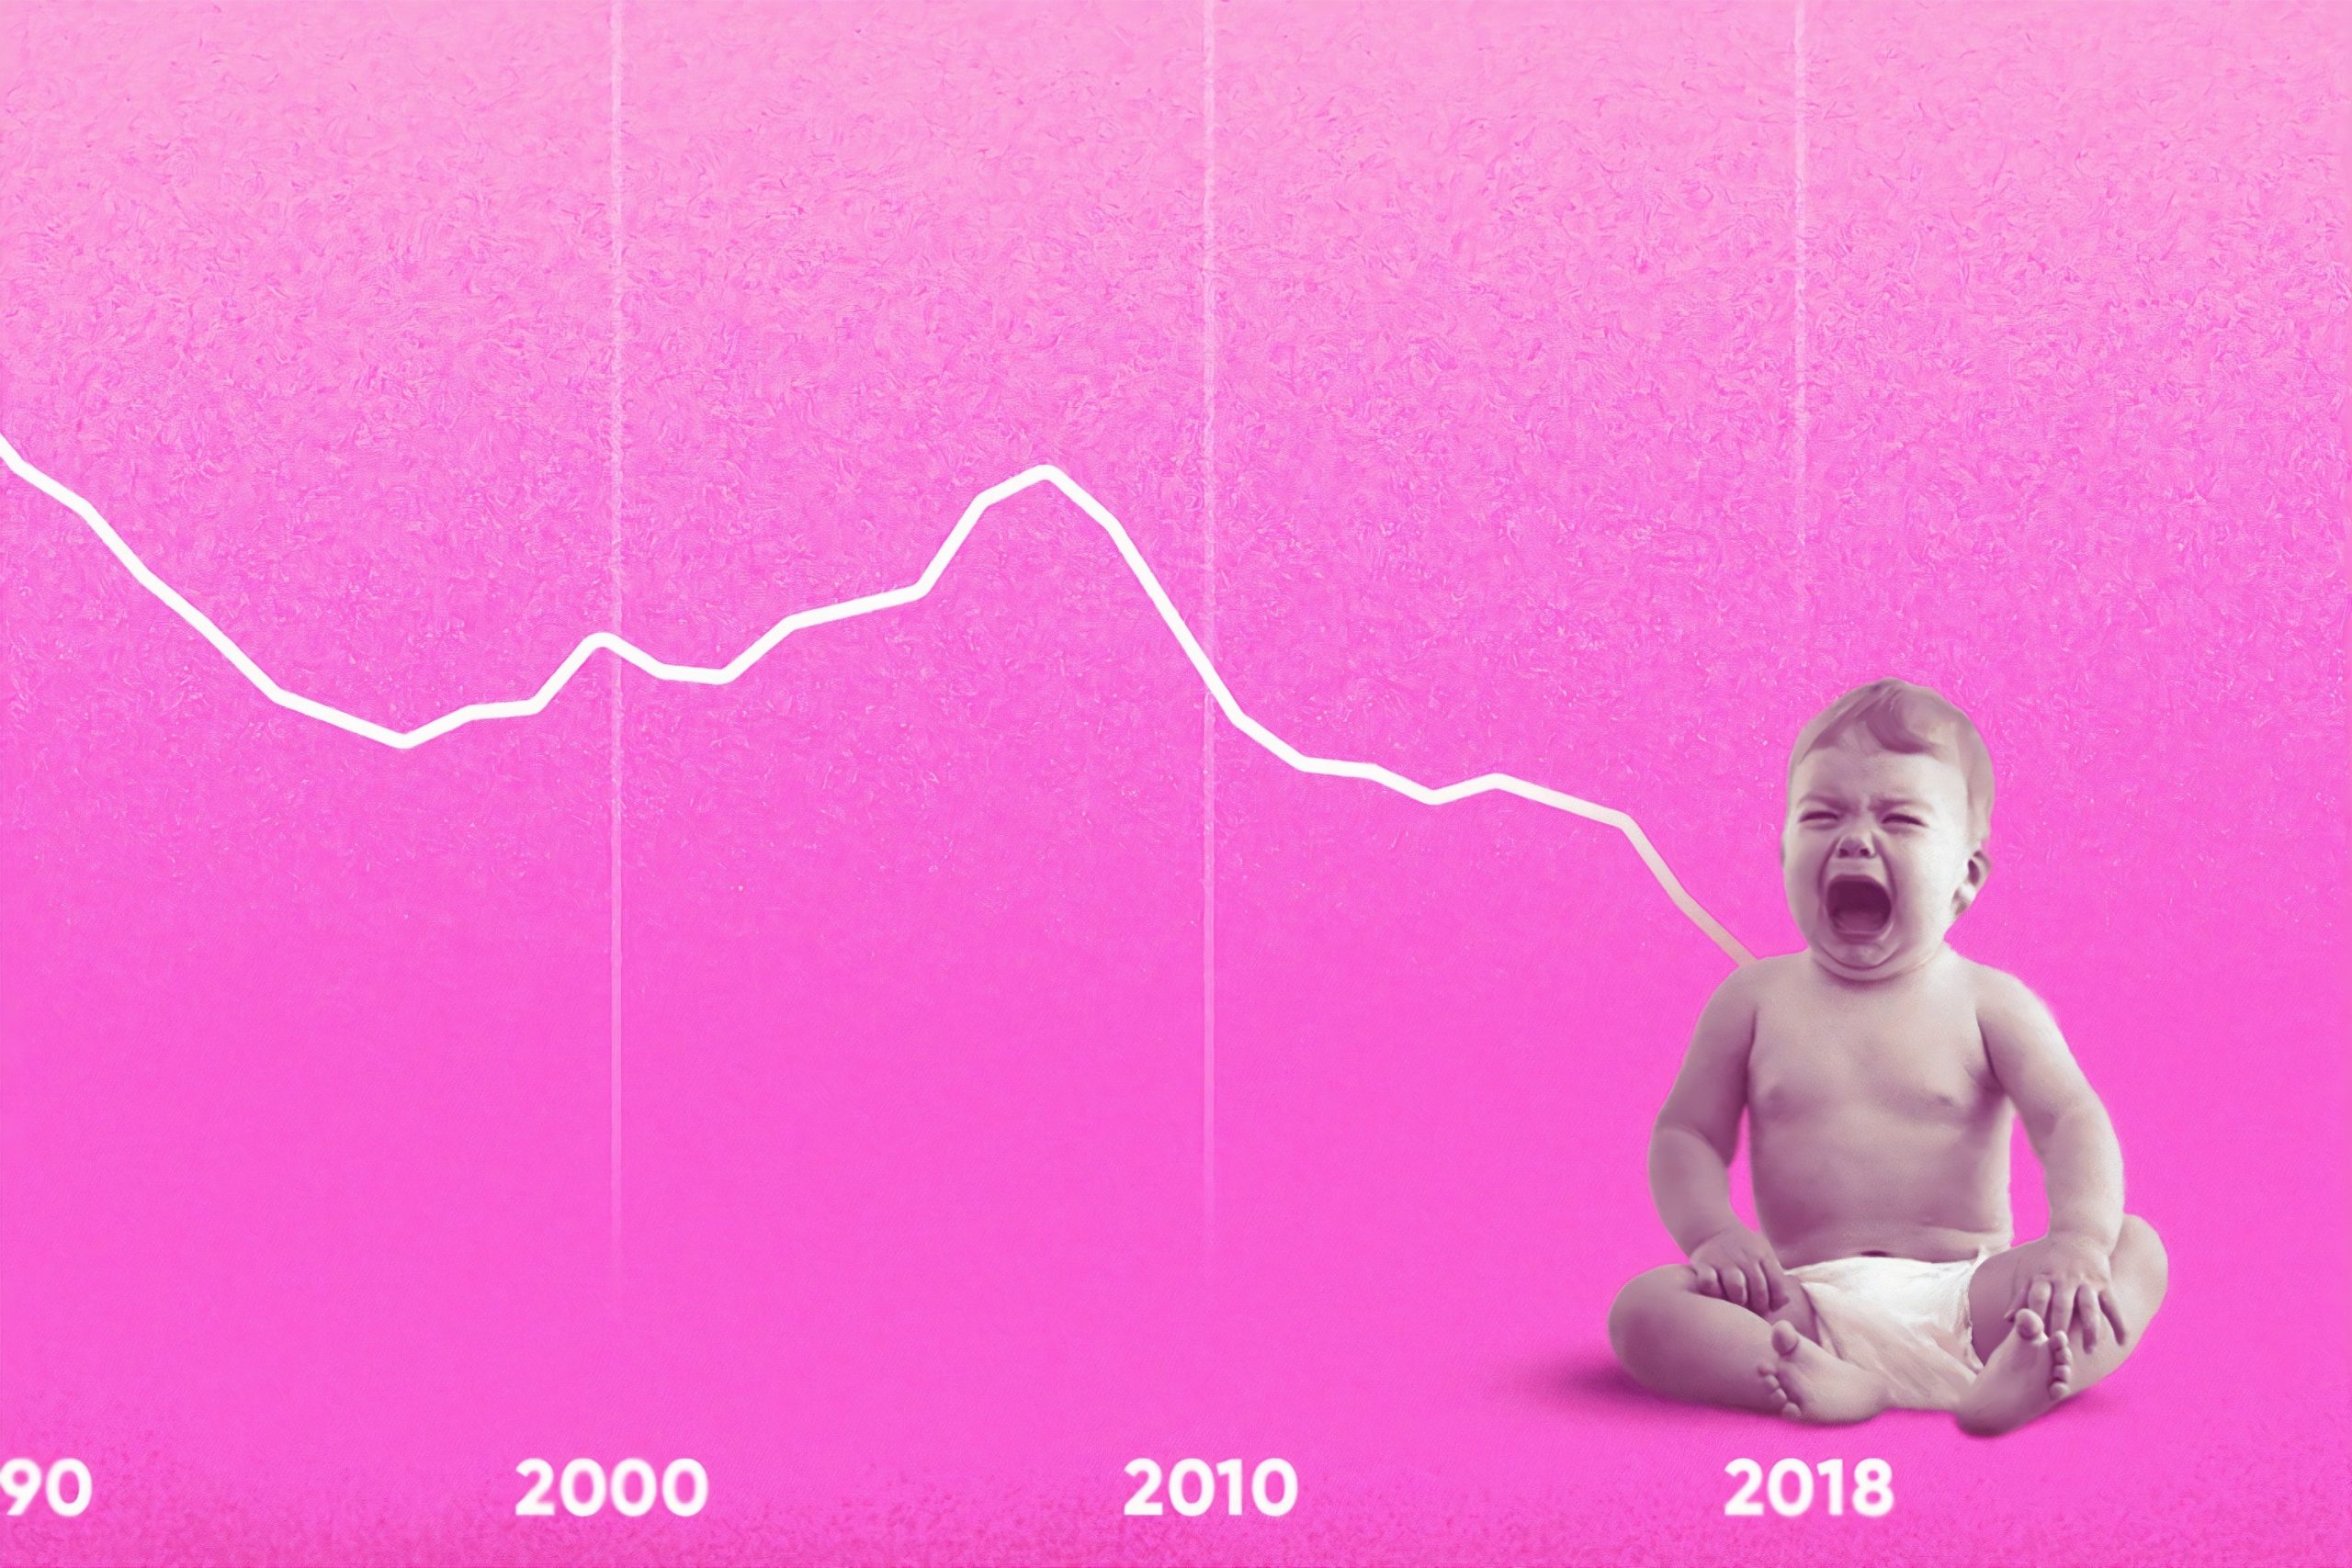 A graph image with a toddler sitting in front of it